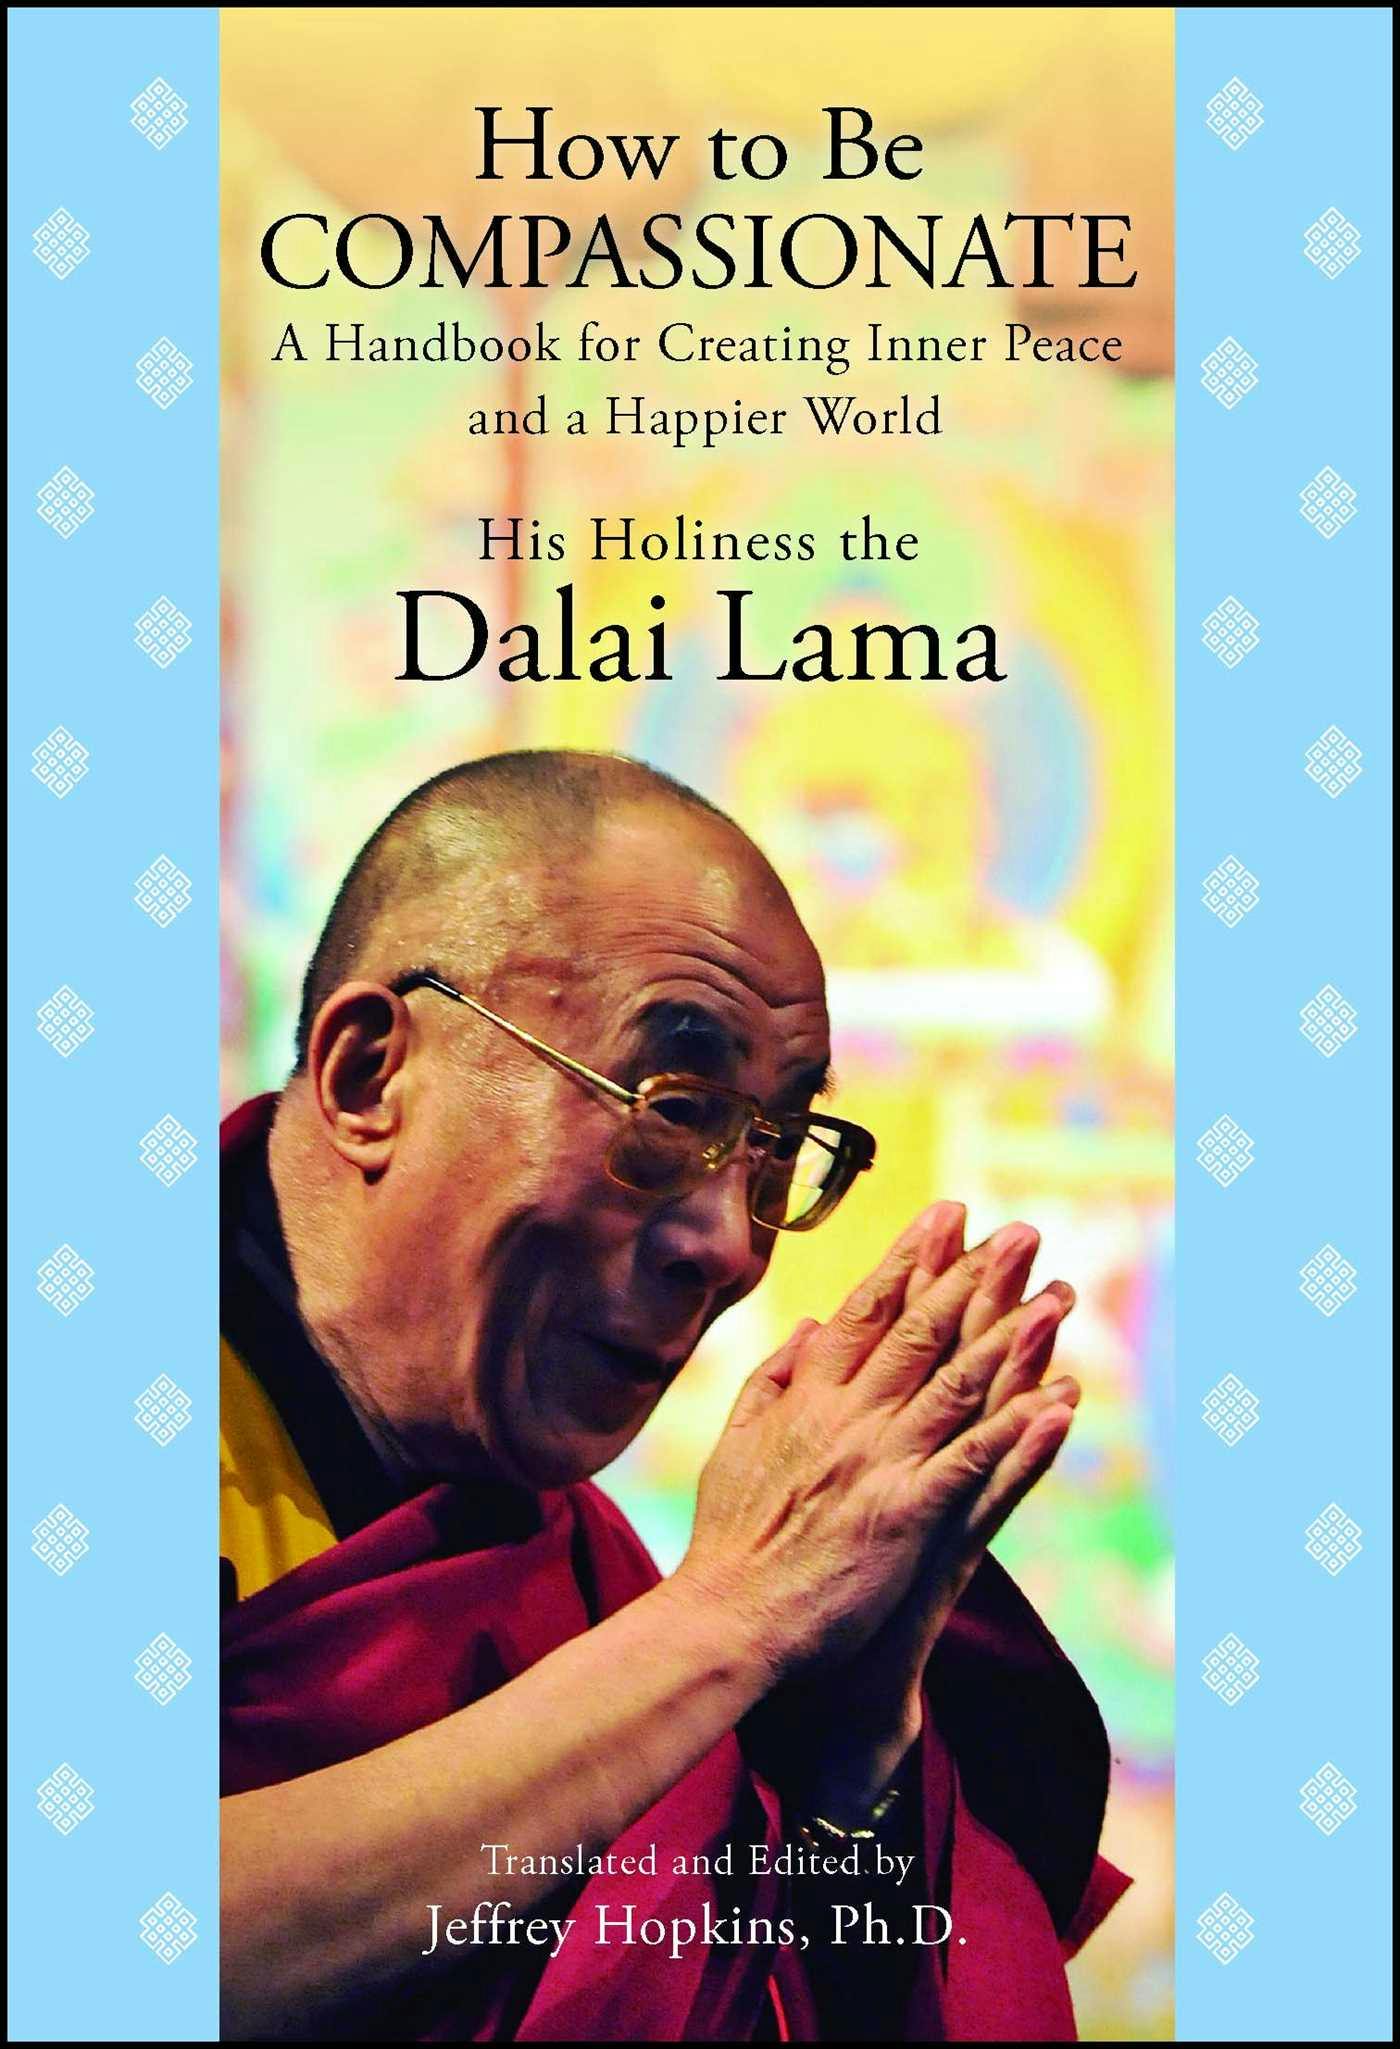 How to Be Compassionate: A Handbook for Creating Inner Peace and a Happier World - His Holiness the Dalai Lama